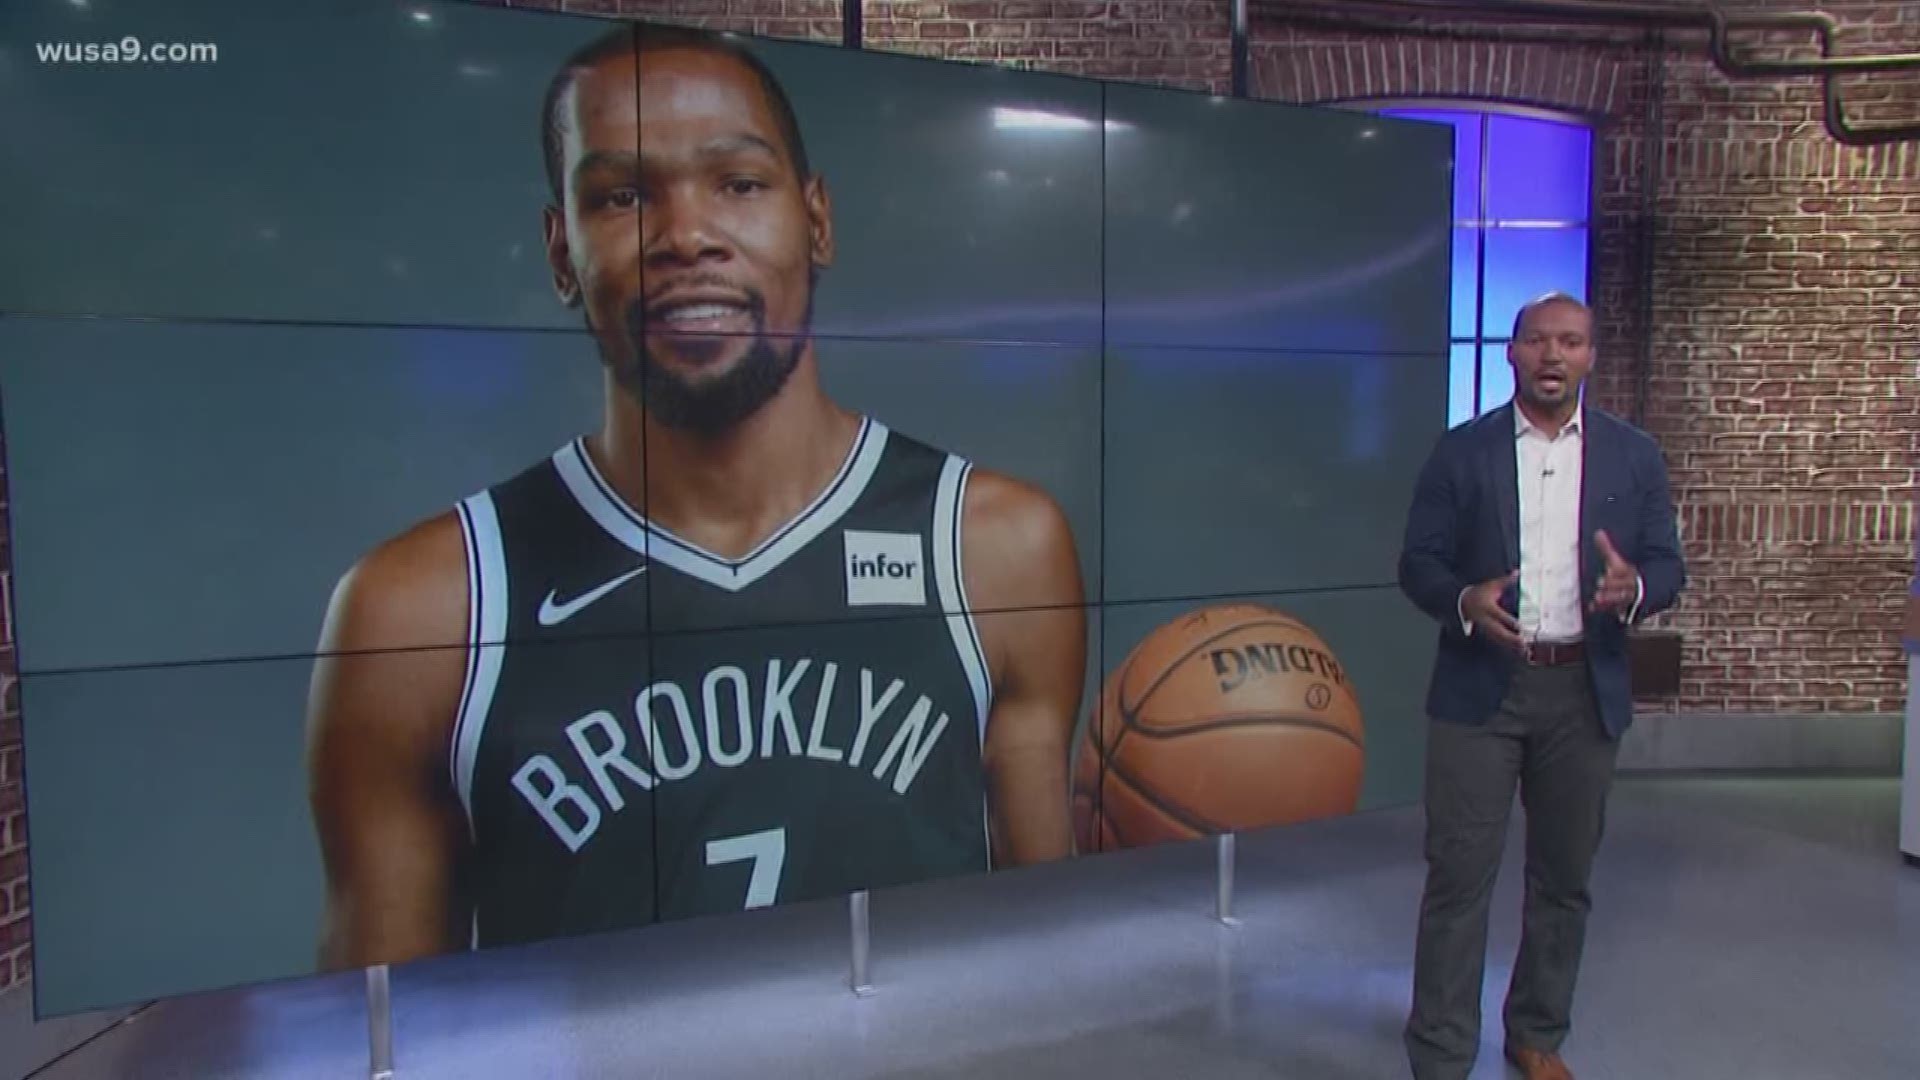 NBA star Kevin Durant is reportedly one of four Brooklyn Nets players to test positive for COVID-19.